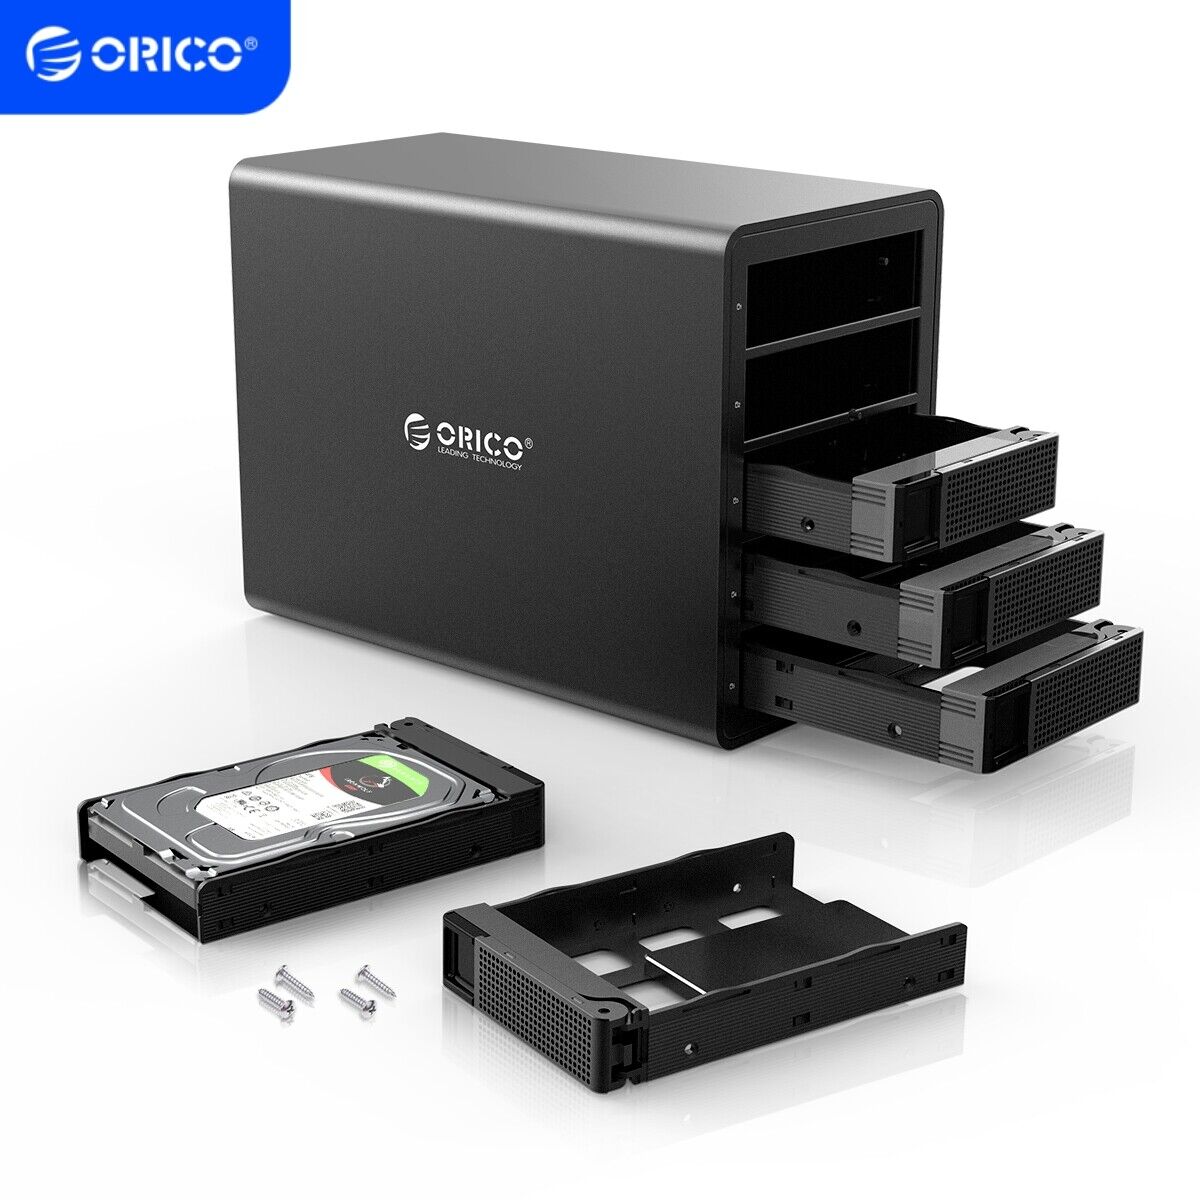 ORICO 5 Bay Type-C Hard Drive Enclosure 3.5''&Daisy Chain For 2.5/3.5'' HDD SSDs